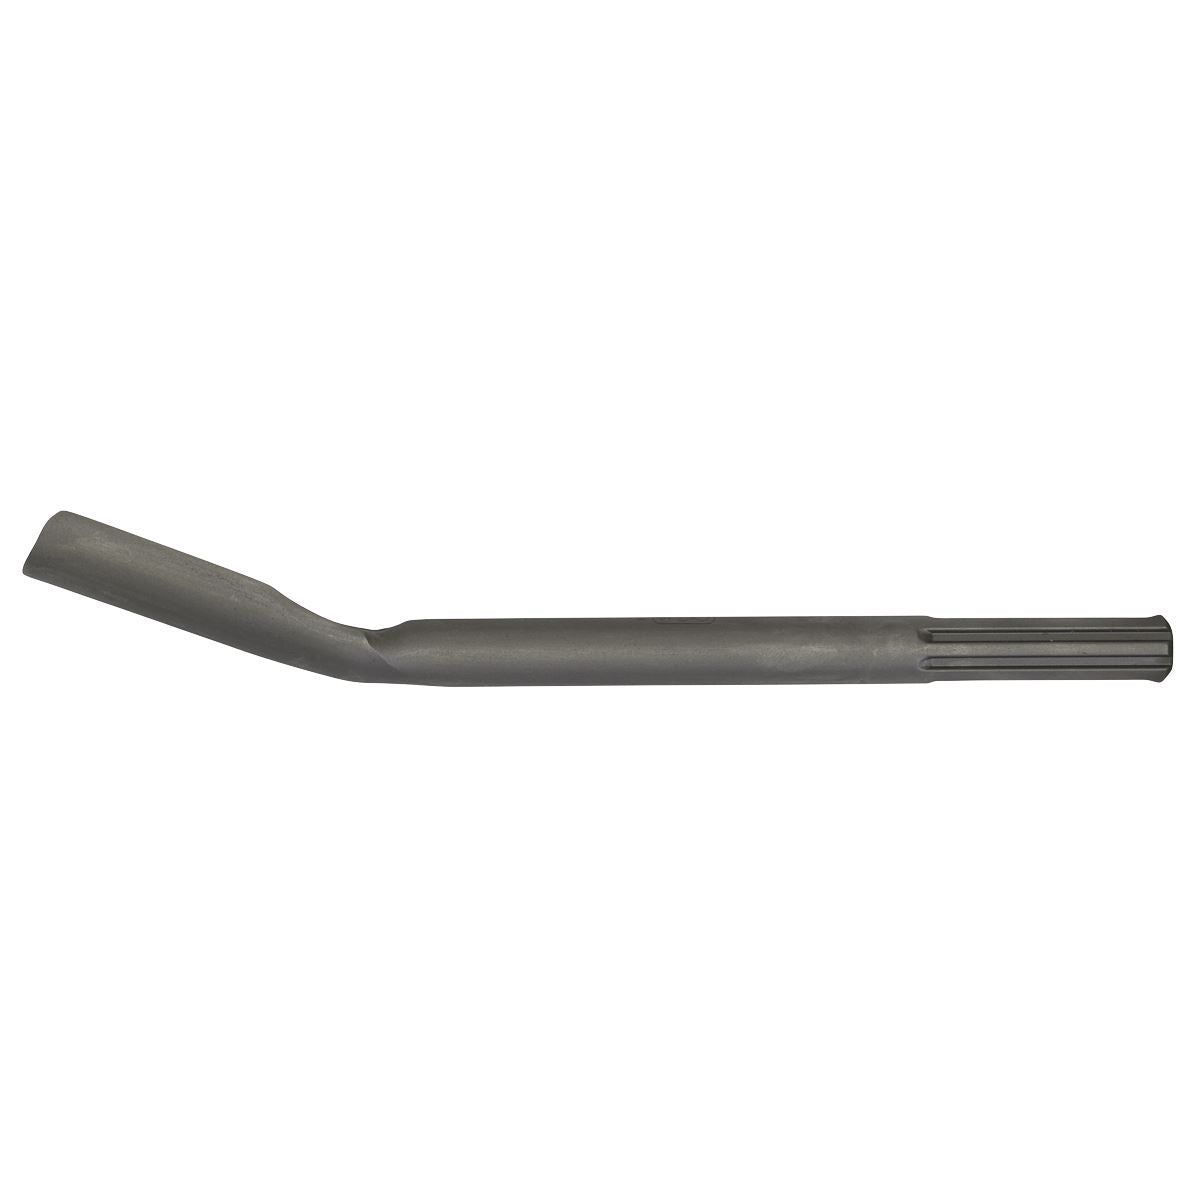 Sealey Hollow Gouge 18 x 450mm - SDS MAX